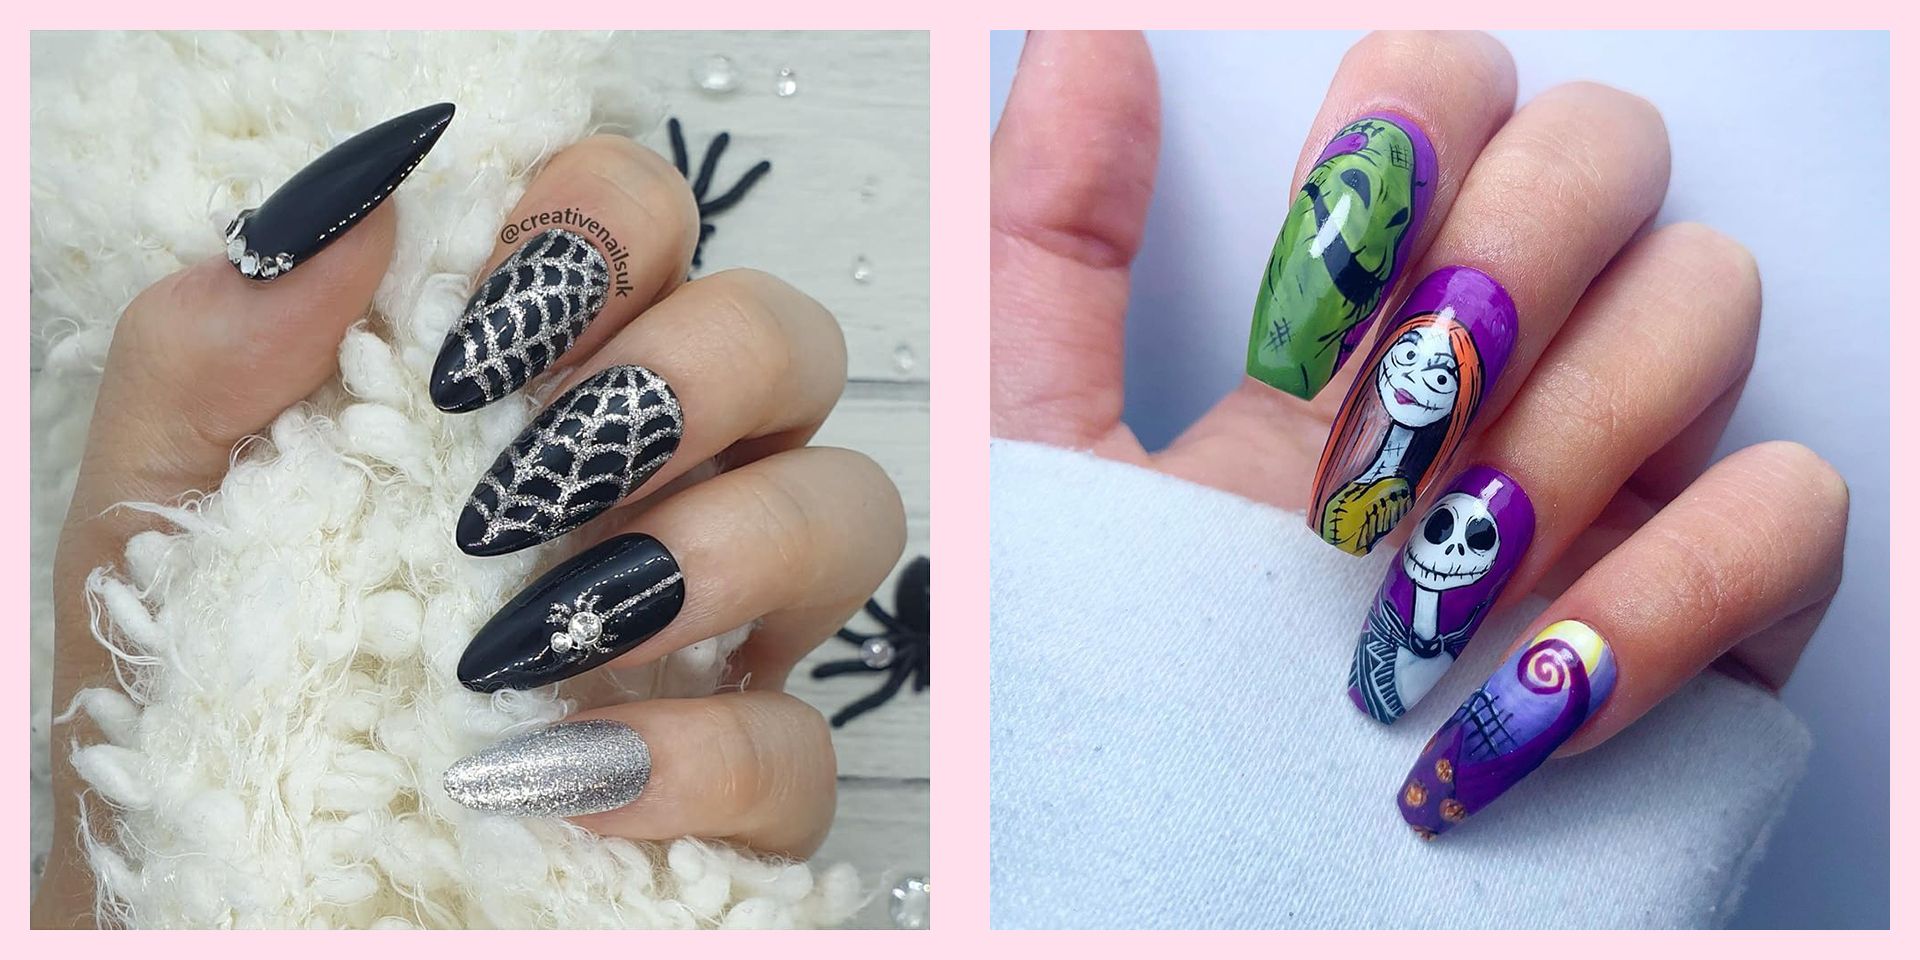 60 Best Halloween Nail Art Ideas and Easy Designs for 2021